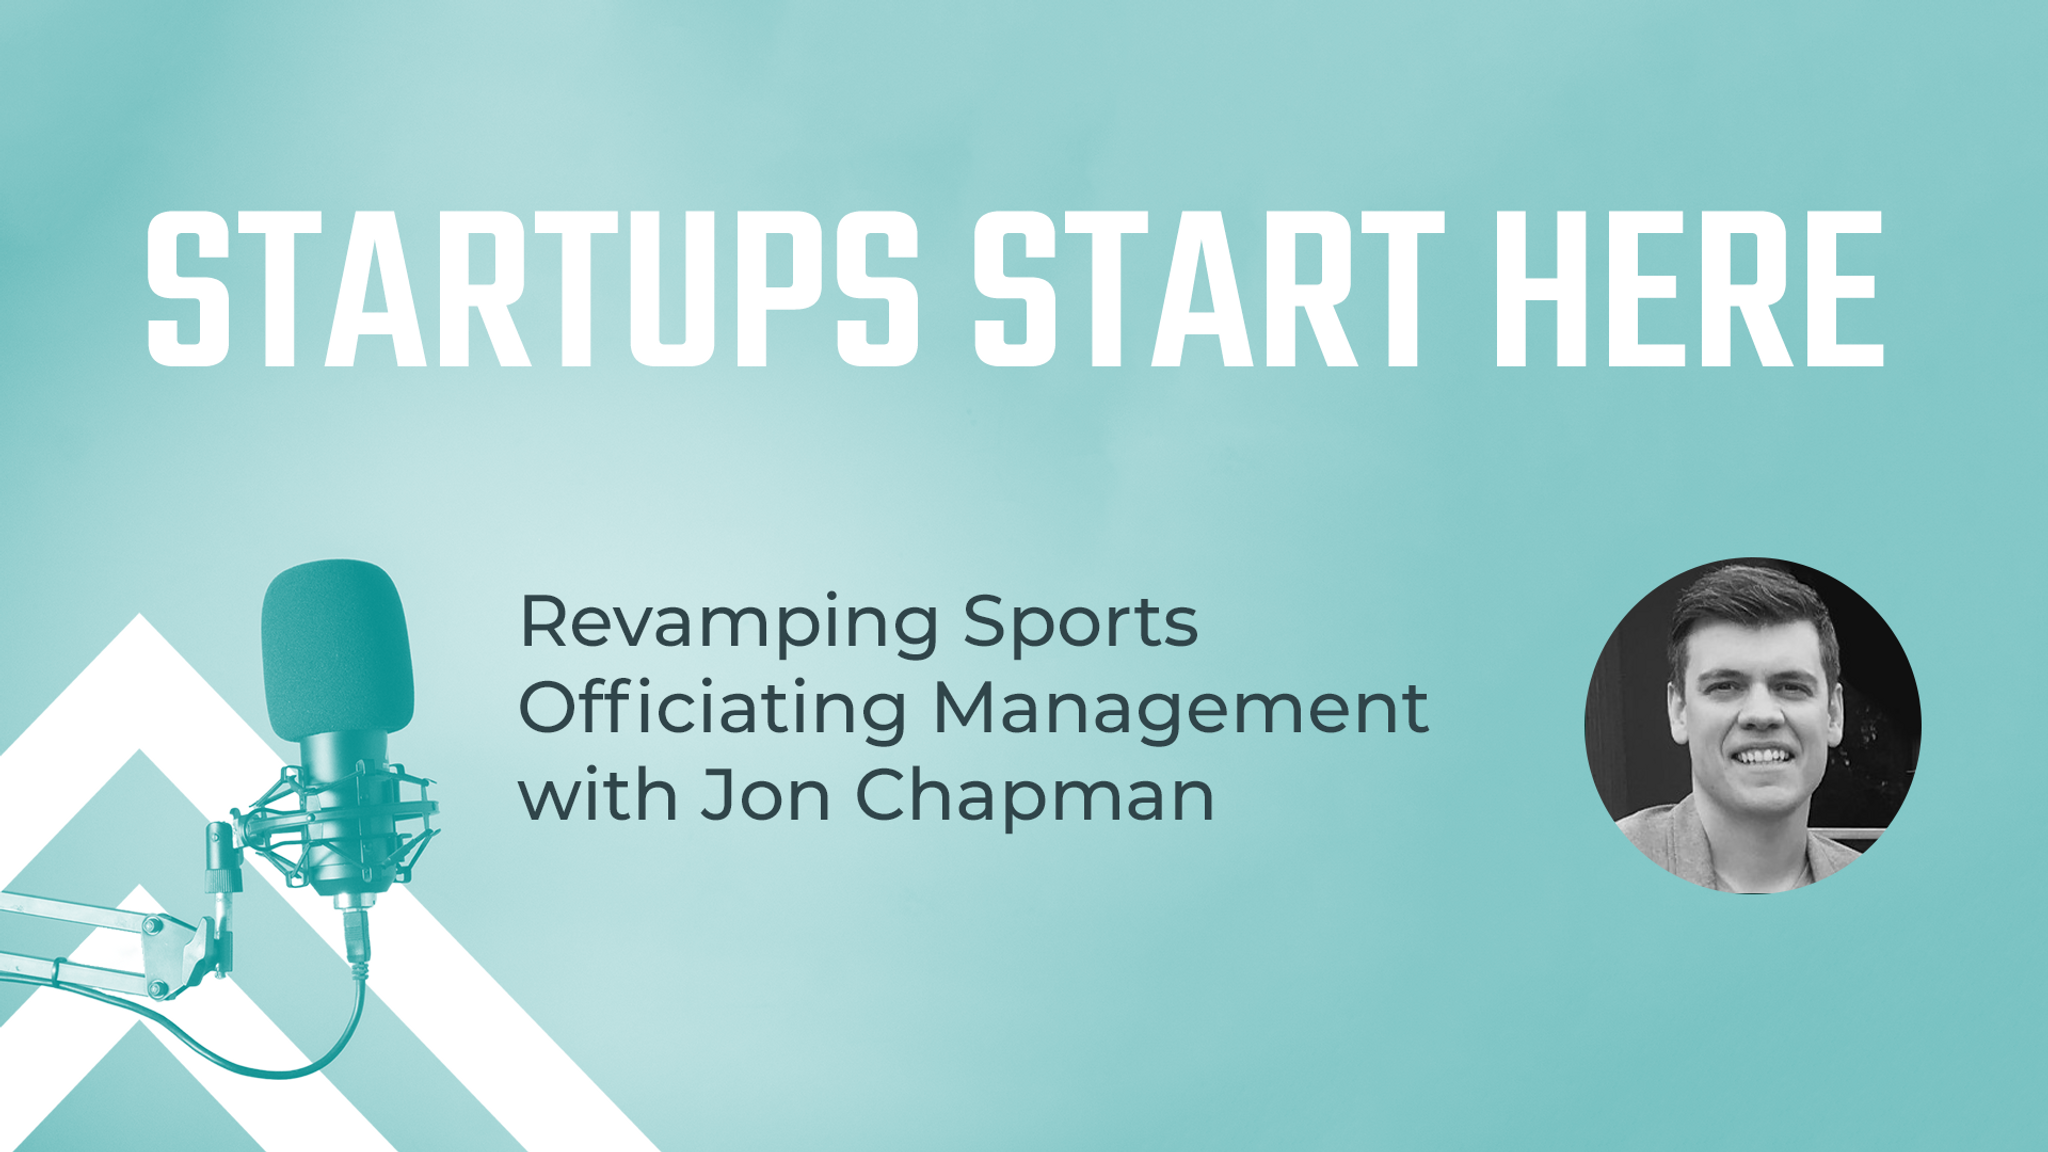 Episode 5 of our Podcast is Out! Tune Into Sports Innovation!